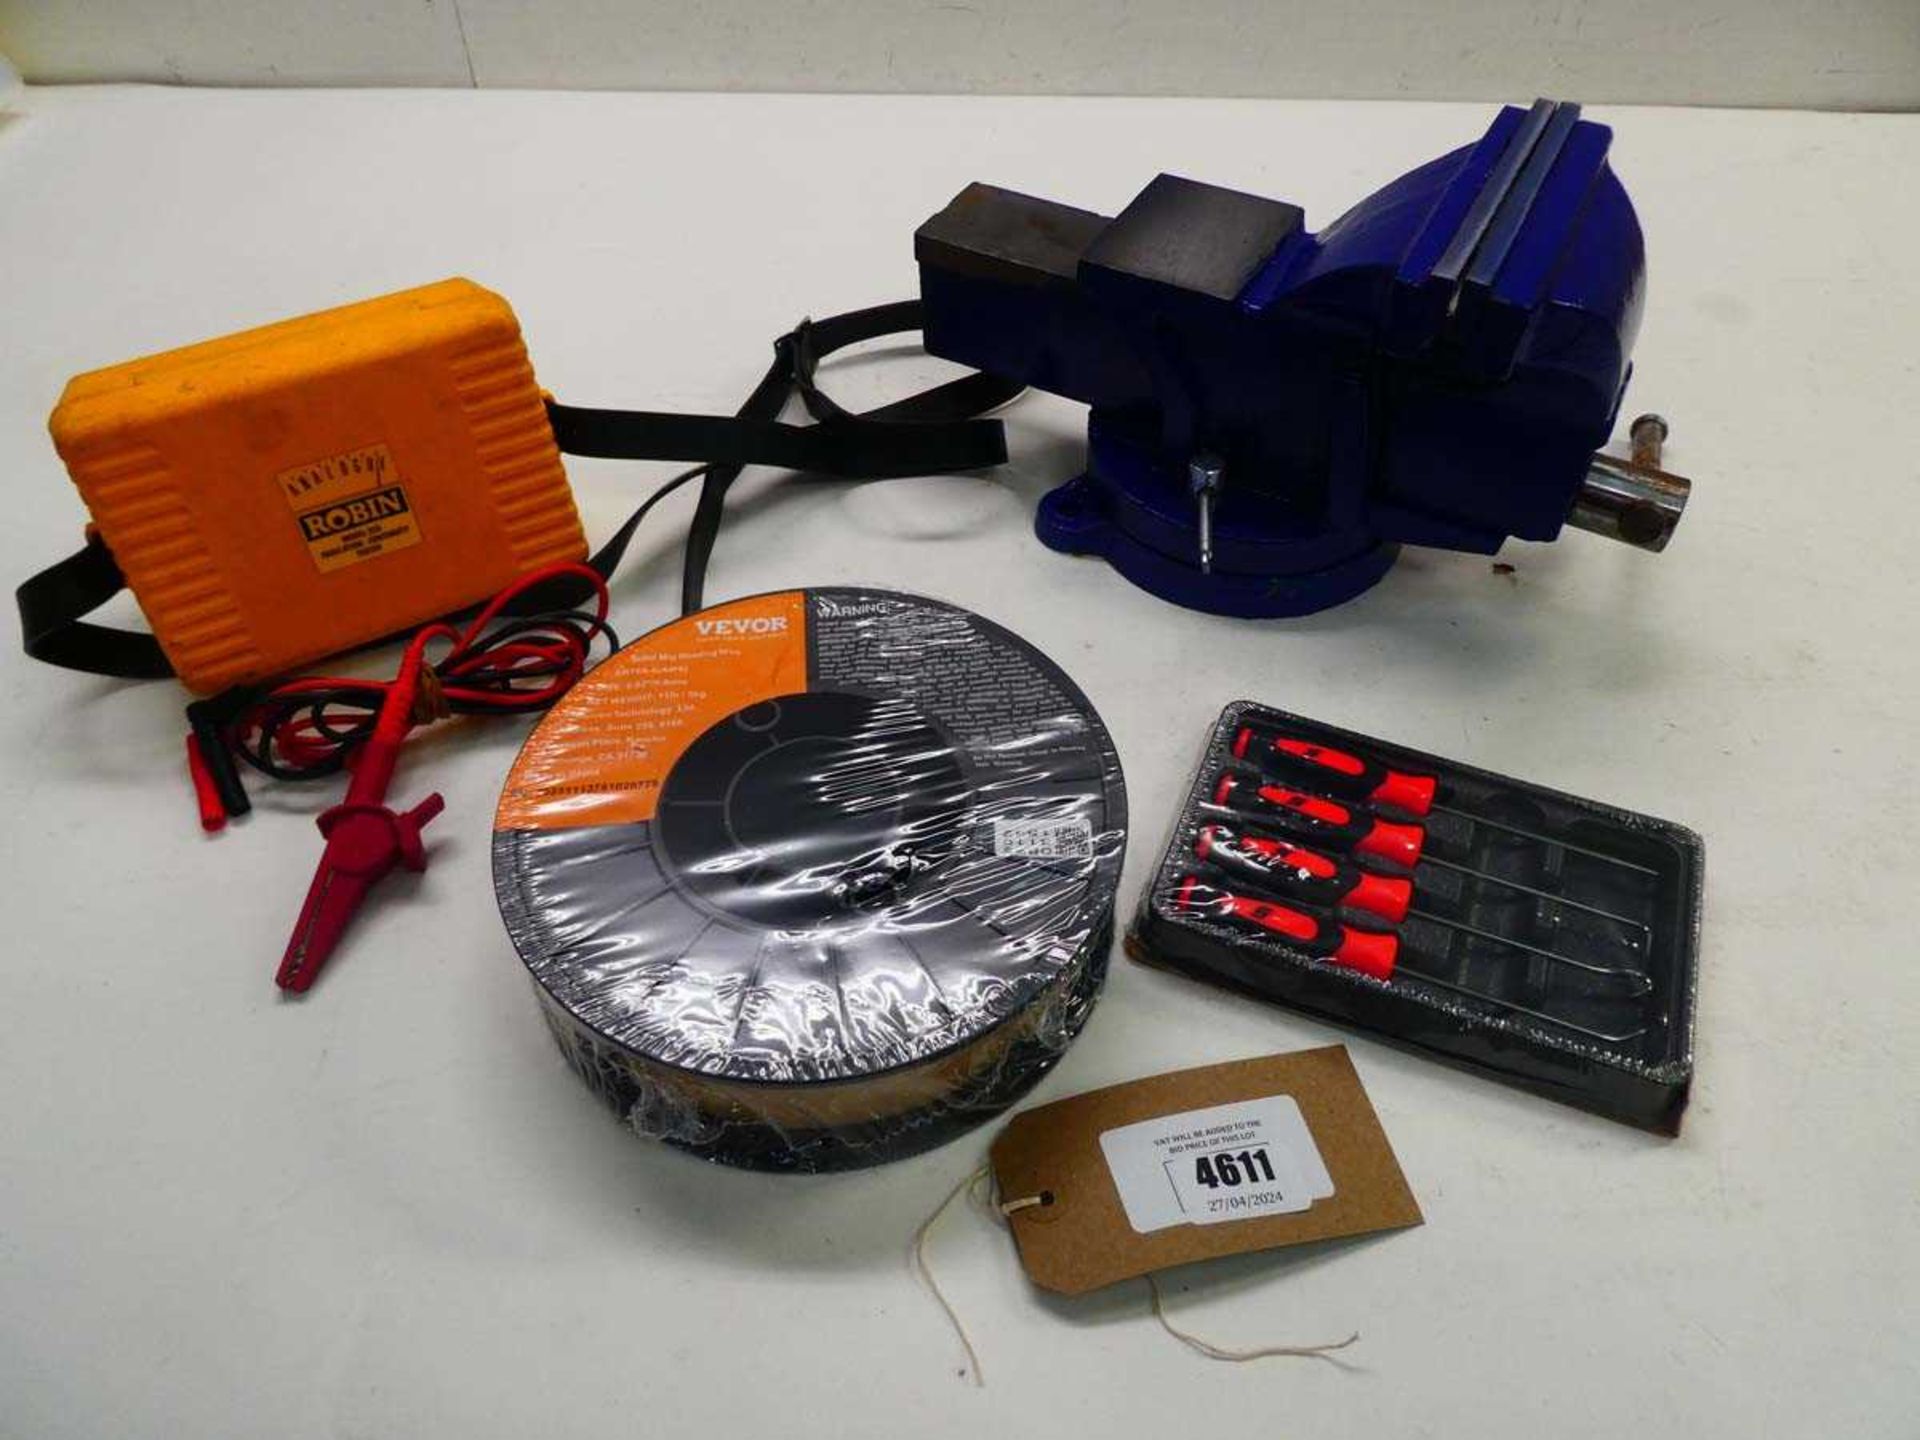 +VAT Benchtop vice, Robin insulation tester, Vevor solid mig welding wire plus a Snap-on 4pc mini